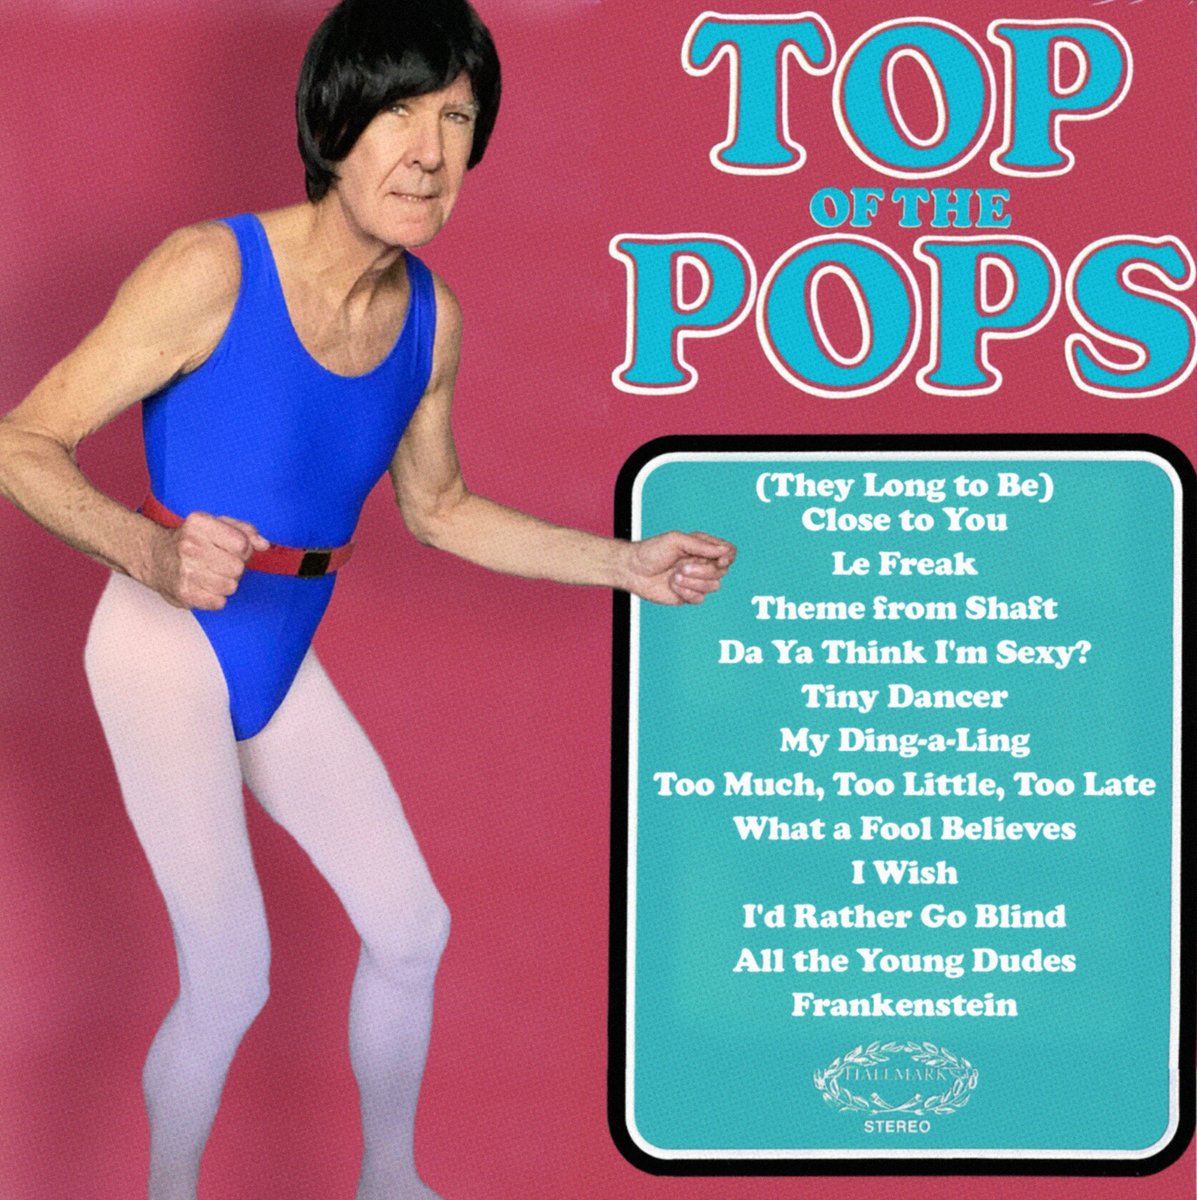 @sleeepysandy I actually did an old AGP TOTPs album cover a while back... I could adapt it for you later, if you like? 😬